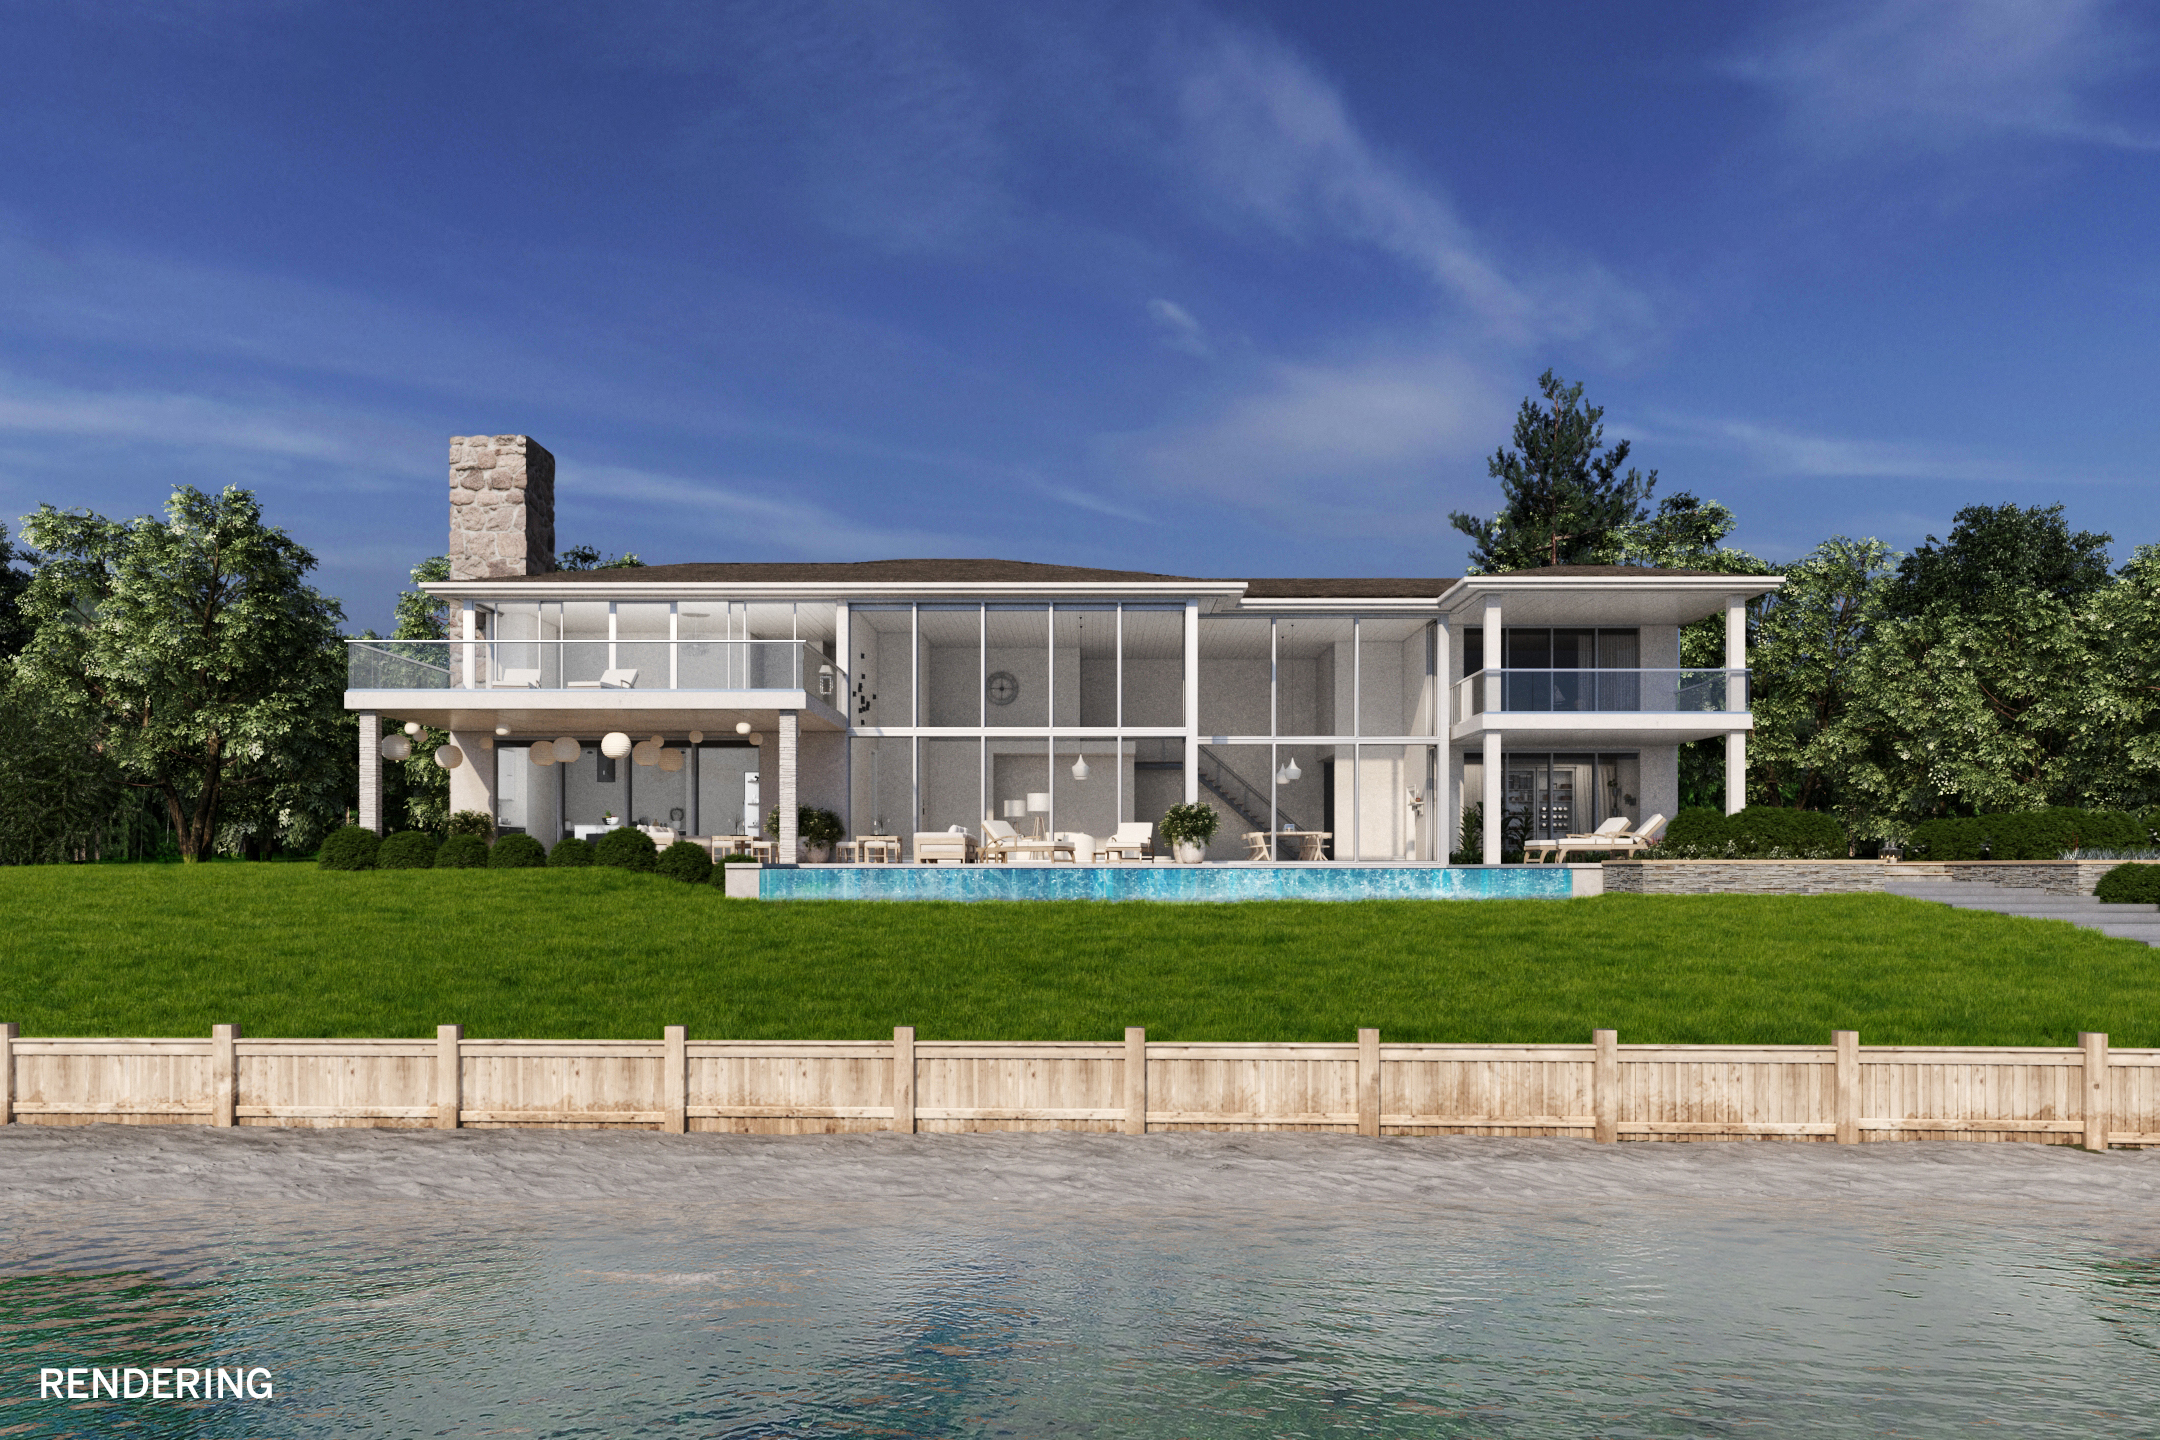 Renderings of a potentional new build at 24 East Harbor Drive.